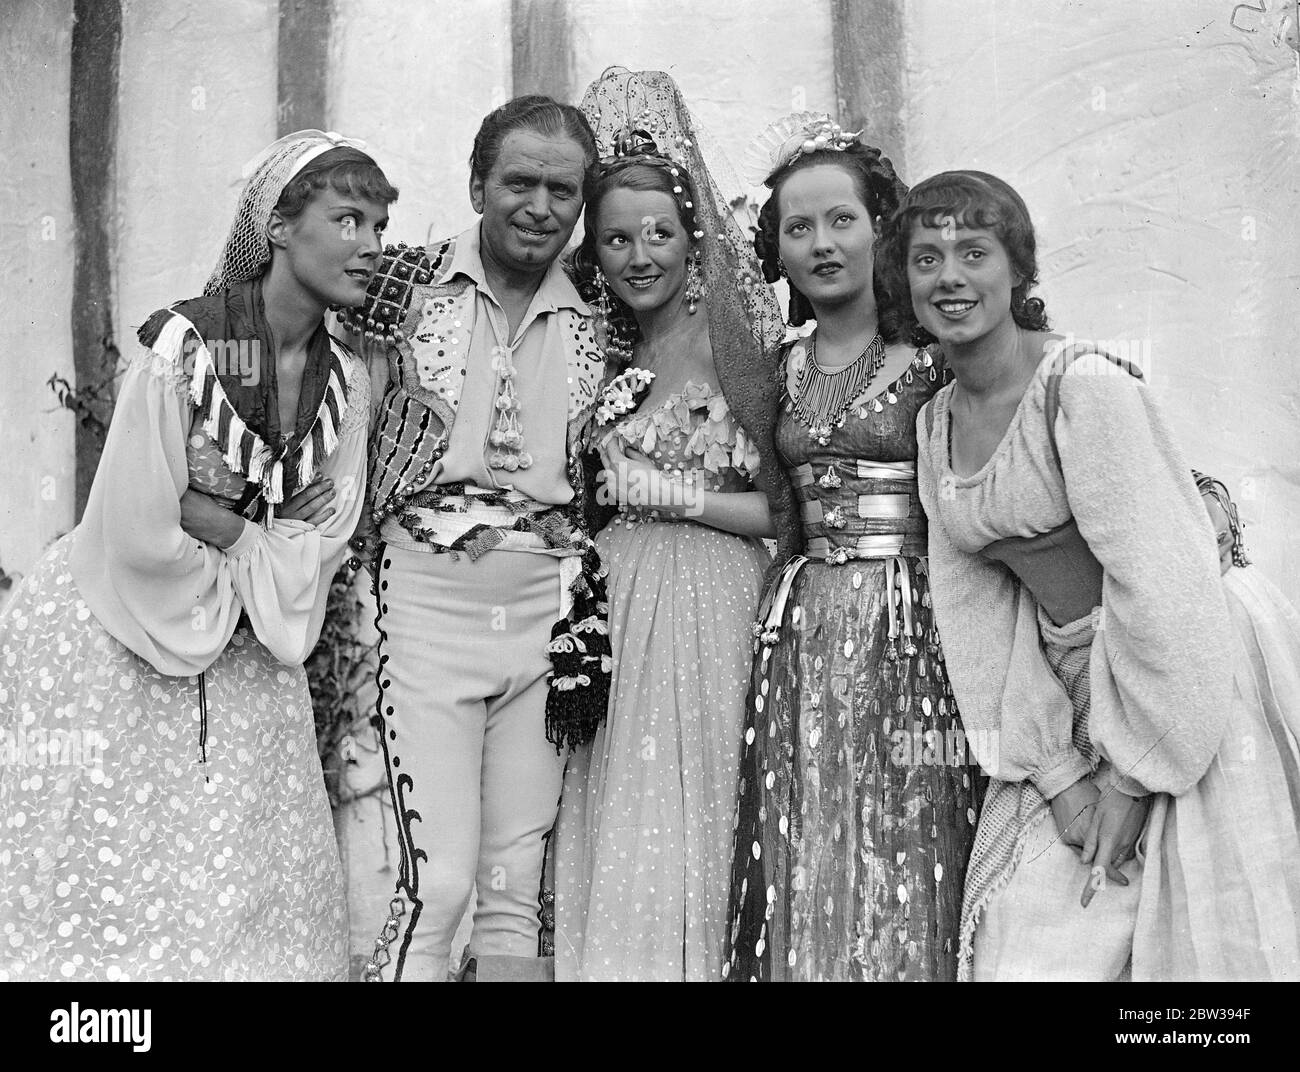 Douglas Fairbanks starts work on his new British film . Production of Douglas Fairbanks ' s new film ' The Private Life of Don Juan ' has been started at the Imperial Film Productions studios . Merle Oberon and Benita Hume are also in the cast . Photo shows , Douglas Fairbanks and Merle Oberon ( 2nd from right ) with other members of the cast . 5 April 1934 30s, 30's, 1930s, 1930's, thirties, nineteen thirties Stock Photo